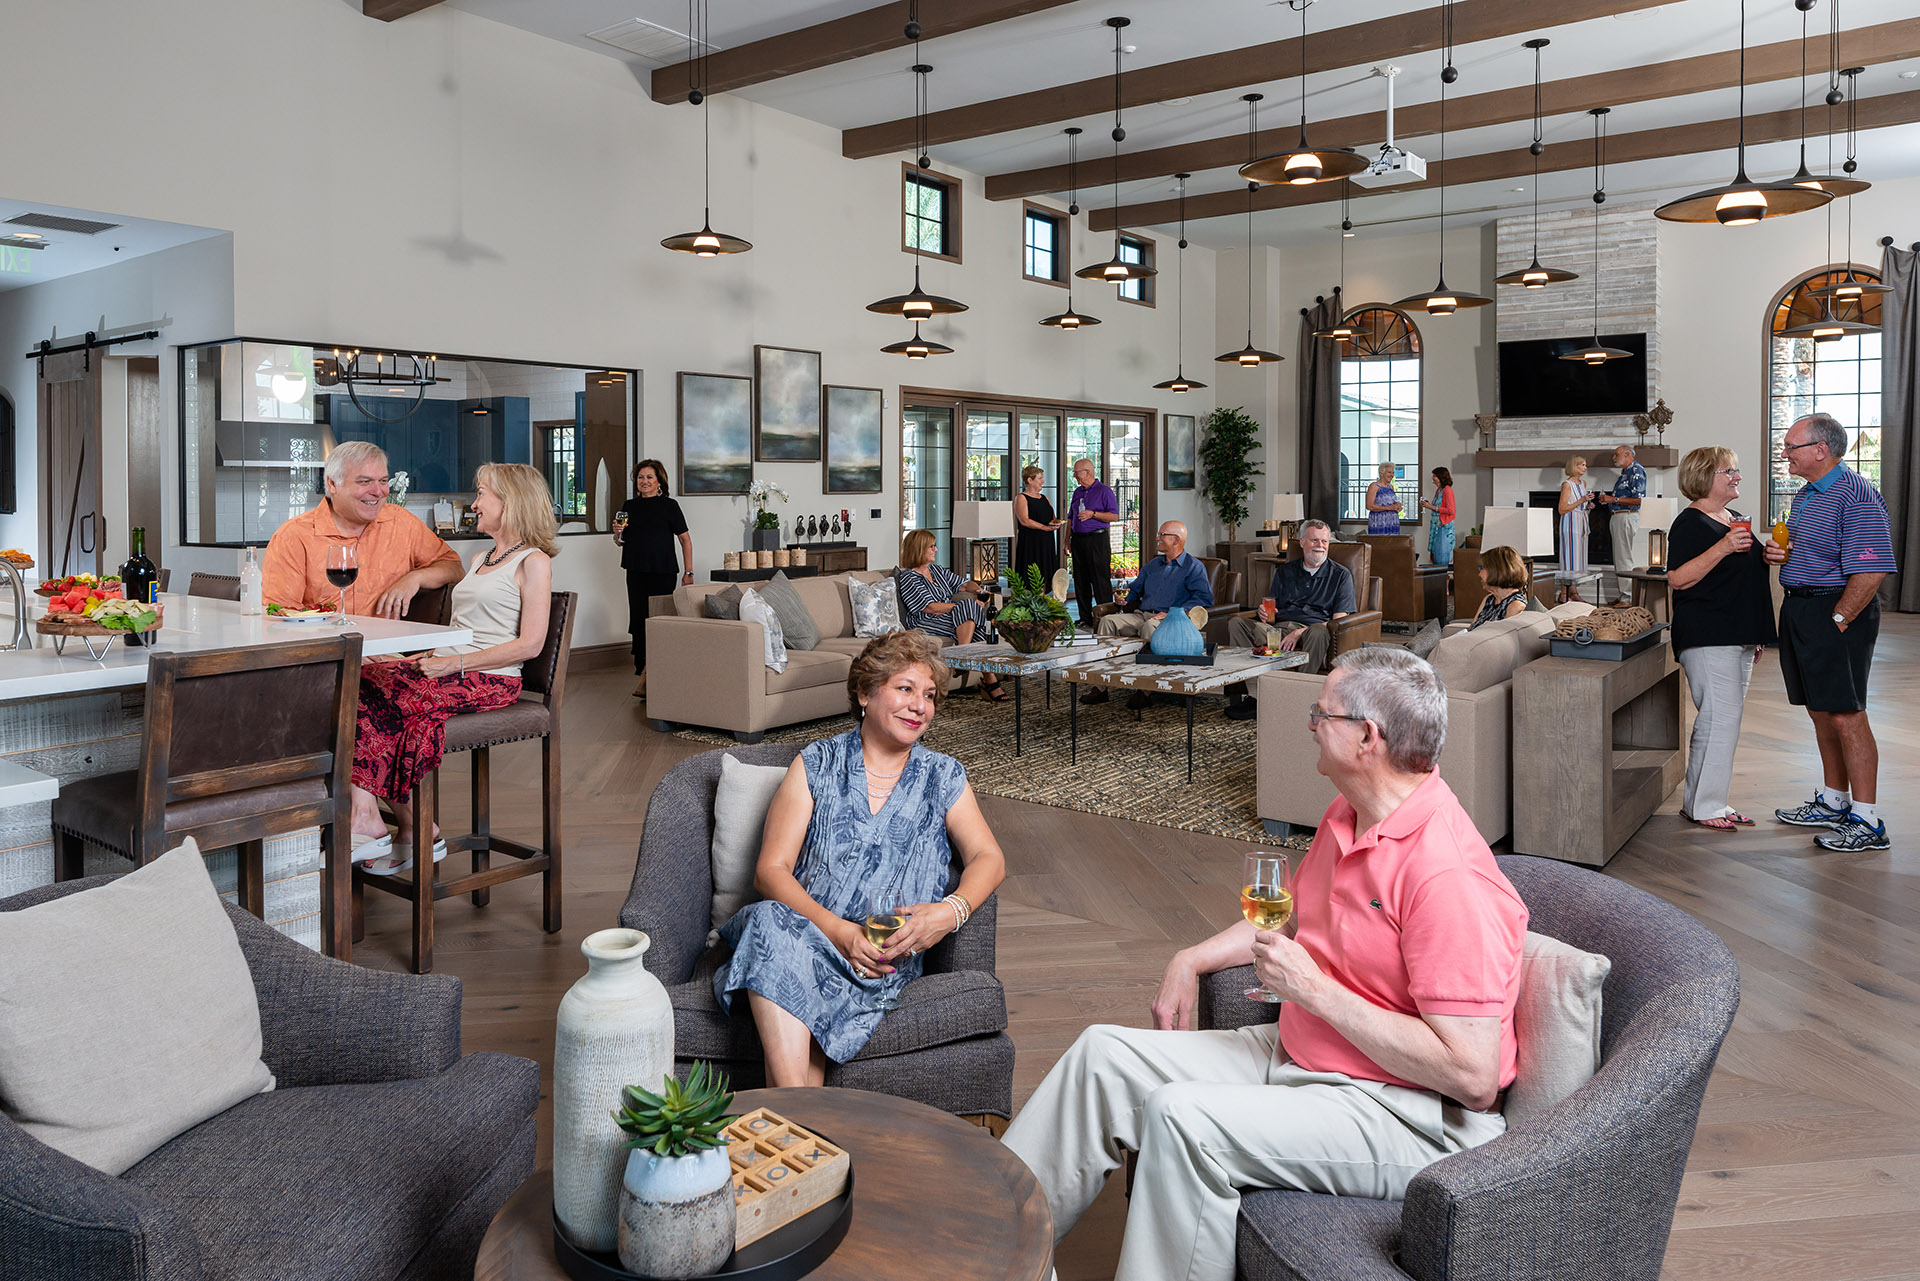 A lively communal space with several senior adults engaging in conversation. some stand by a bar, while others sit on sofas and chairs, chatting and enjoying drinks. the room features a modern, cozy décor.